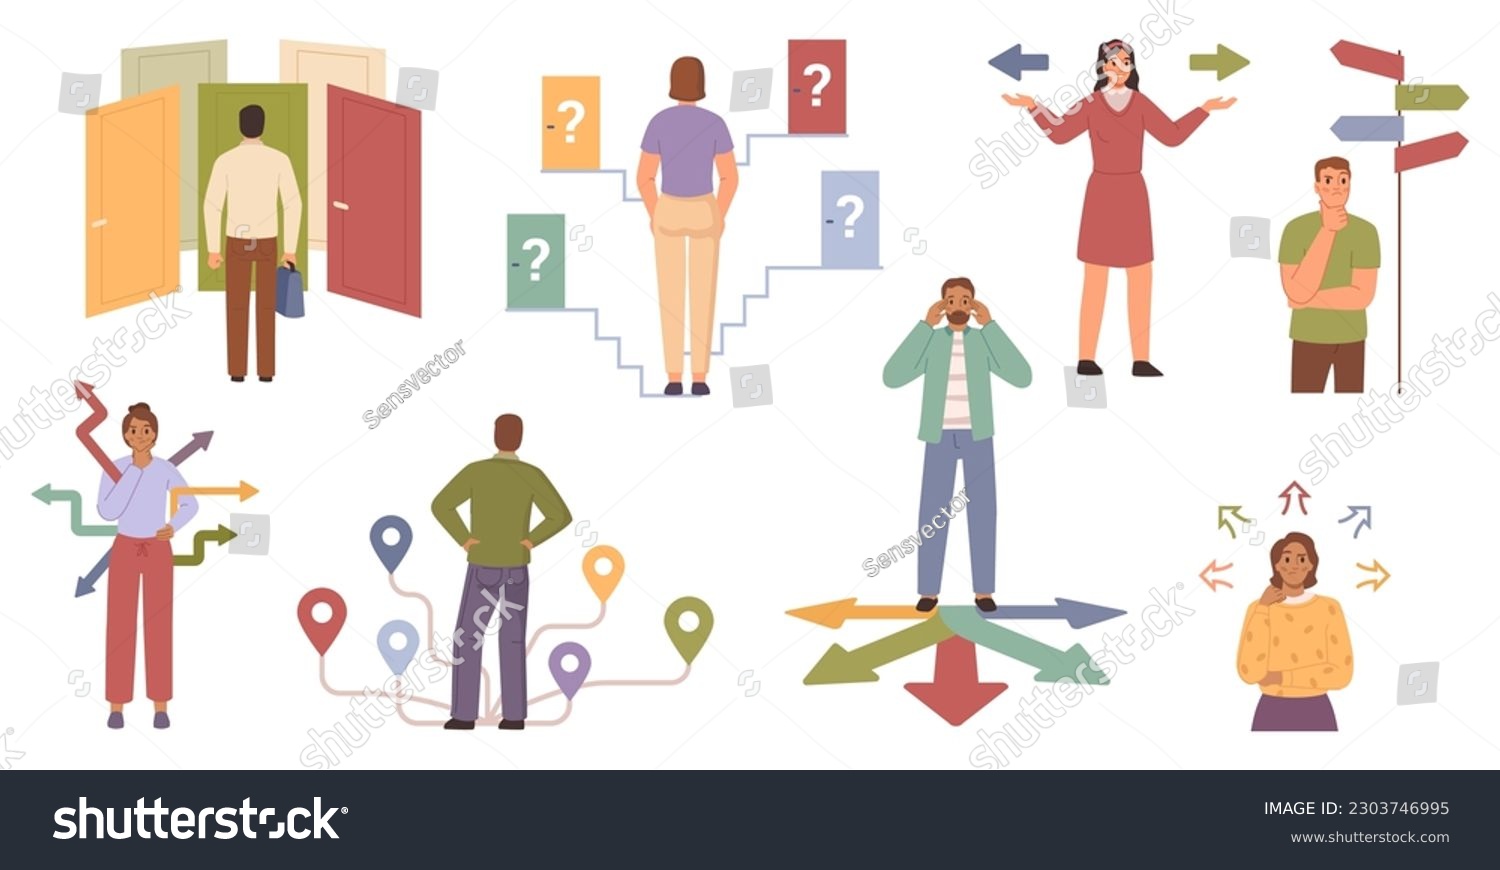 Choosing from multiple directions, solutions people and path choice concept flat cartoon vector illustration. Characters making choices, decisions, life path. Different options, opportunities #2303746995